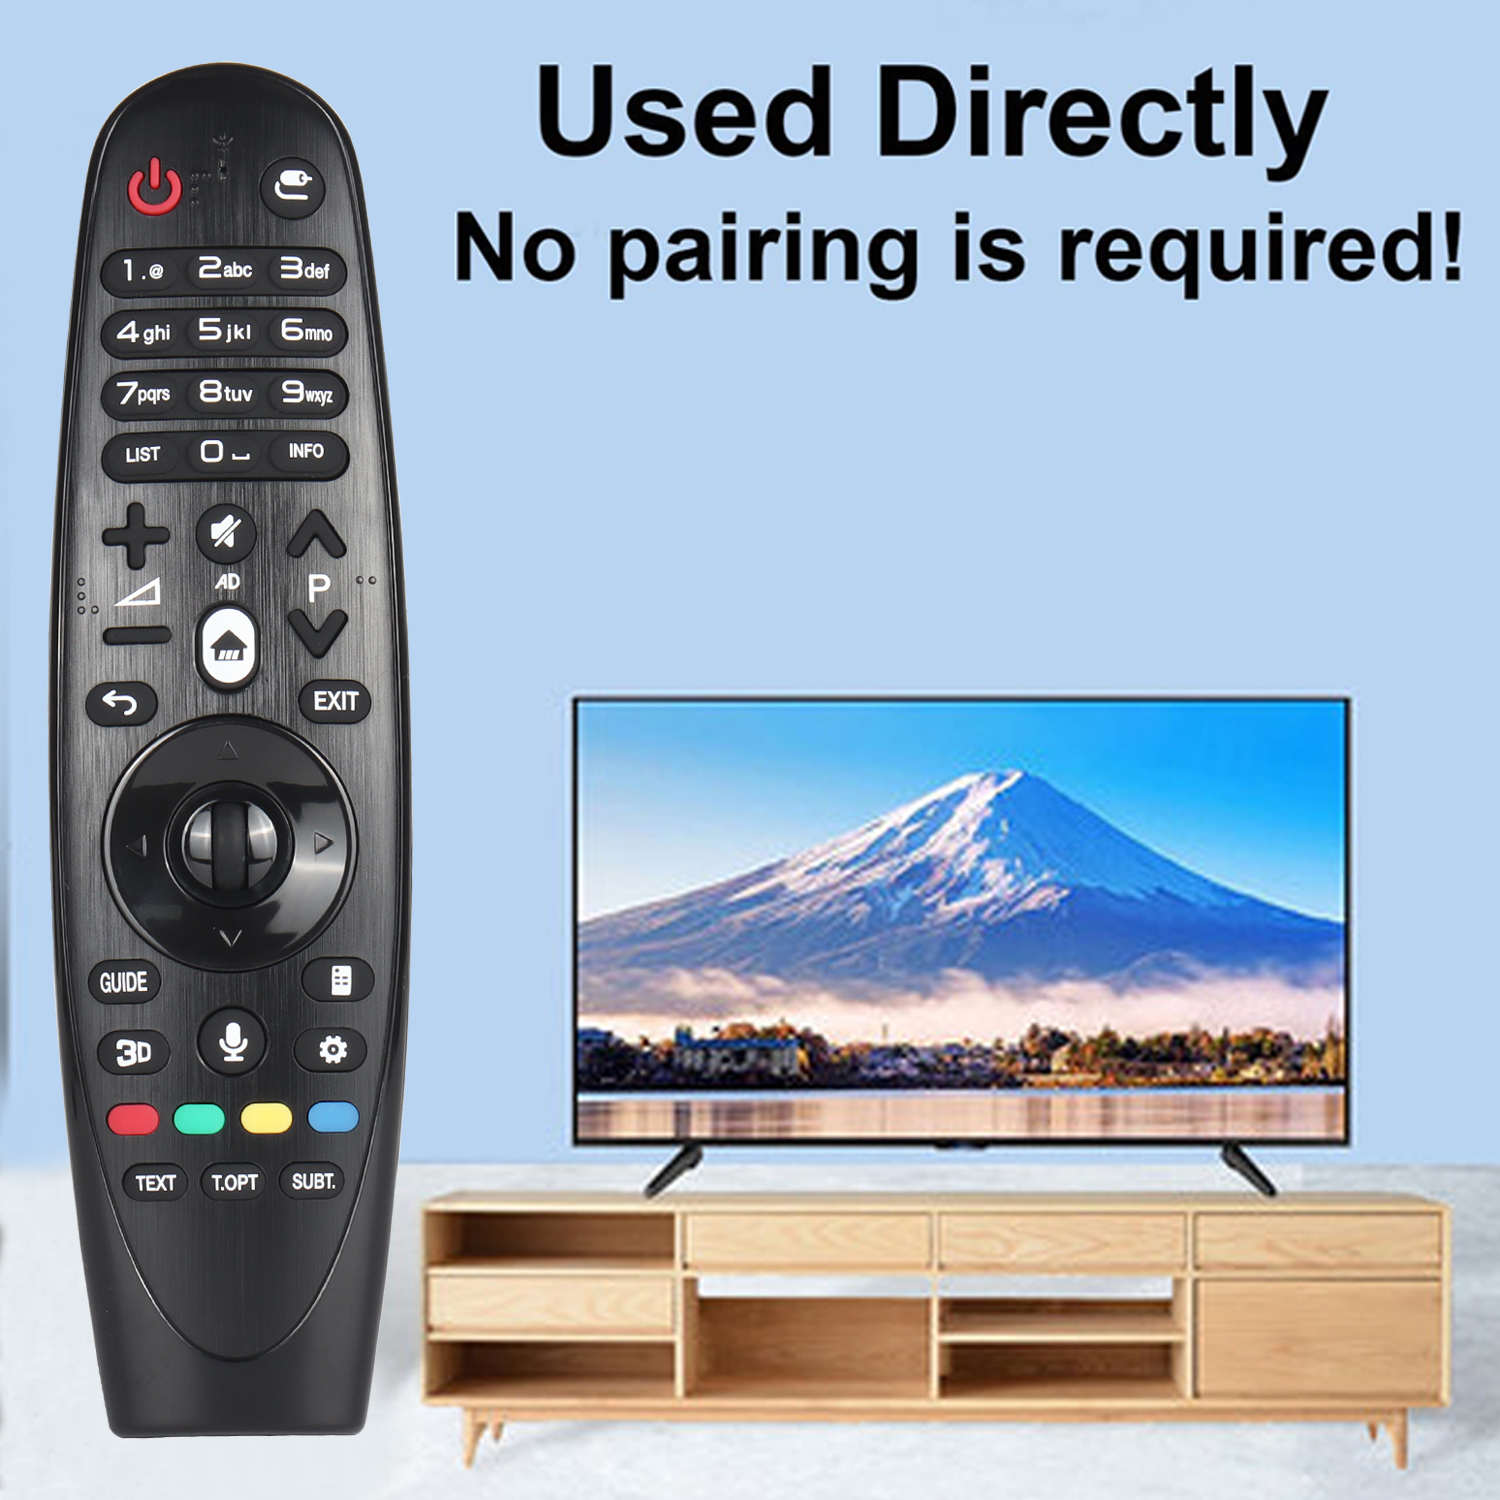 AN-MR600 New IR Remote Control for LG Smart TV 43UF770T 49UF770T 55UF850T 60UF770V 65UF770T with No Voice Magic Pointer Function